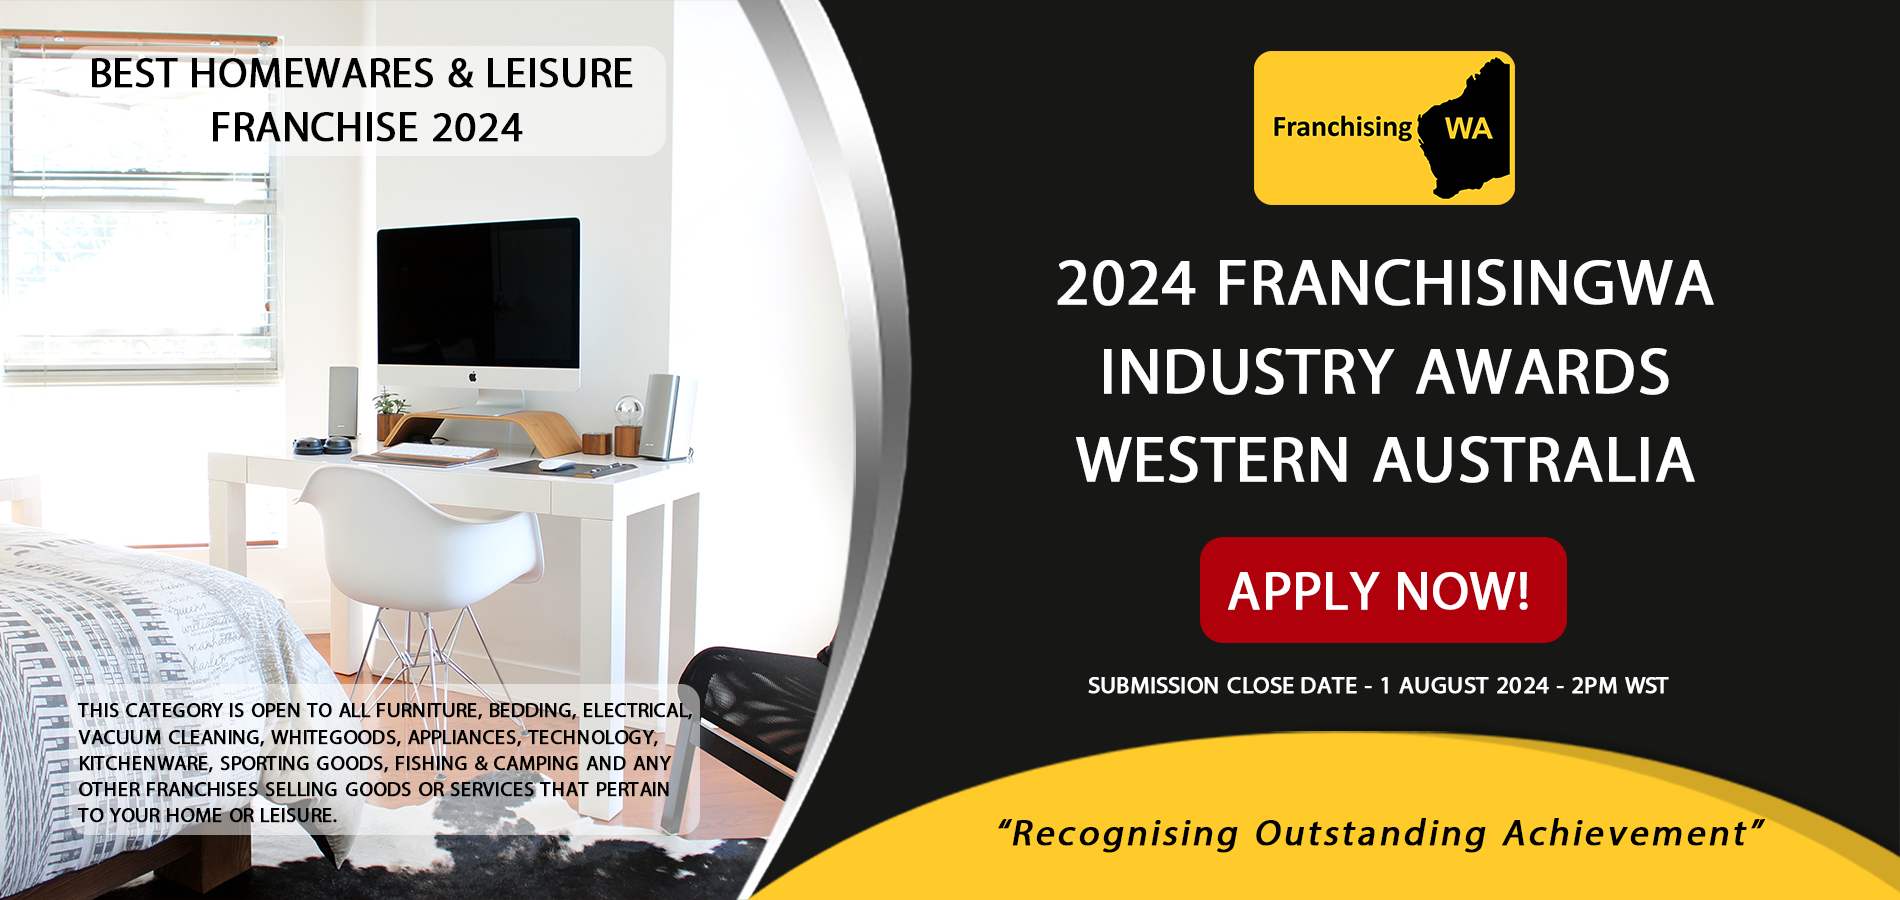 Introducing our Best Homewares & Leisure Franchise 2024 Award Category